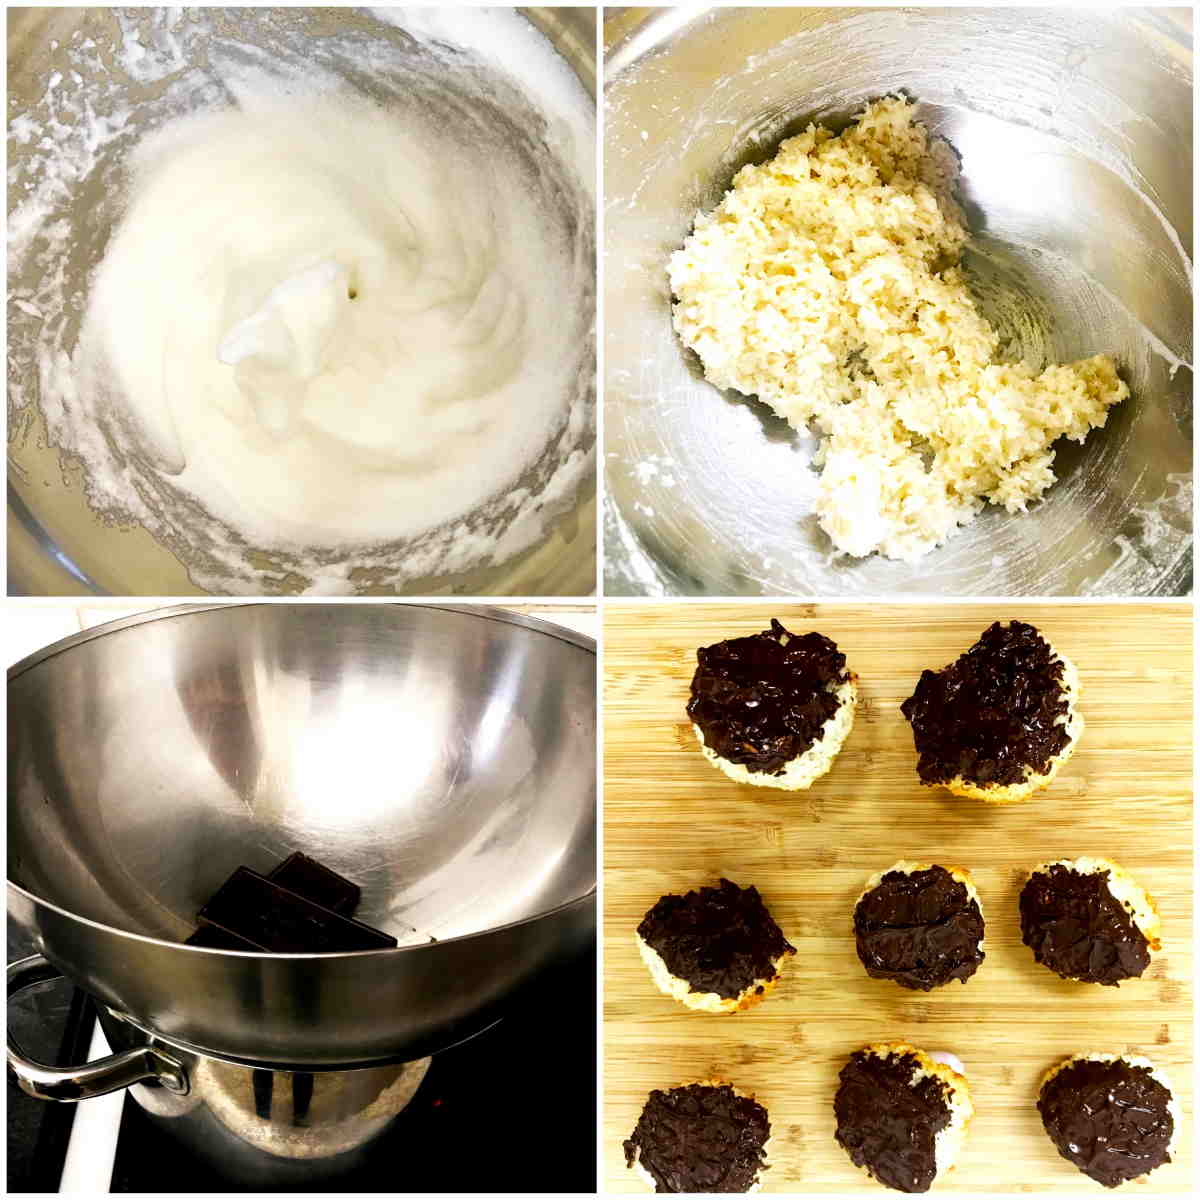 Collage showing whipped egg whites, macaroon mixture in mixing bowl, bain marie set up to melt chocolate and finished macroons dipped in dark chocolate